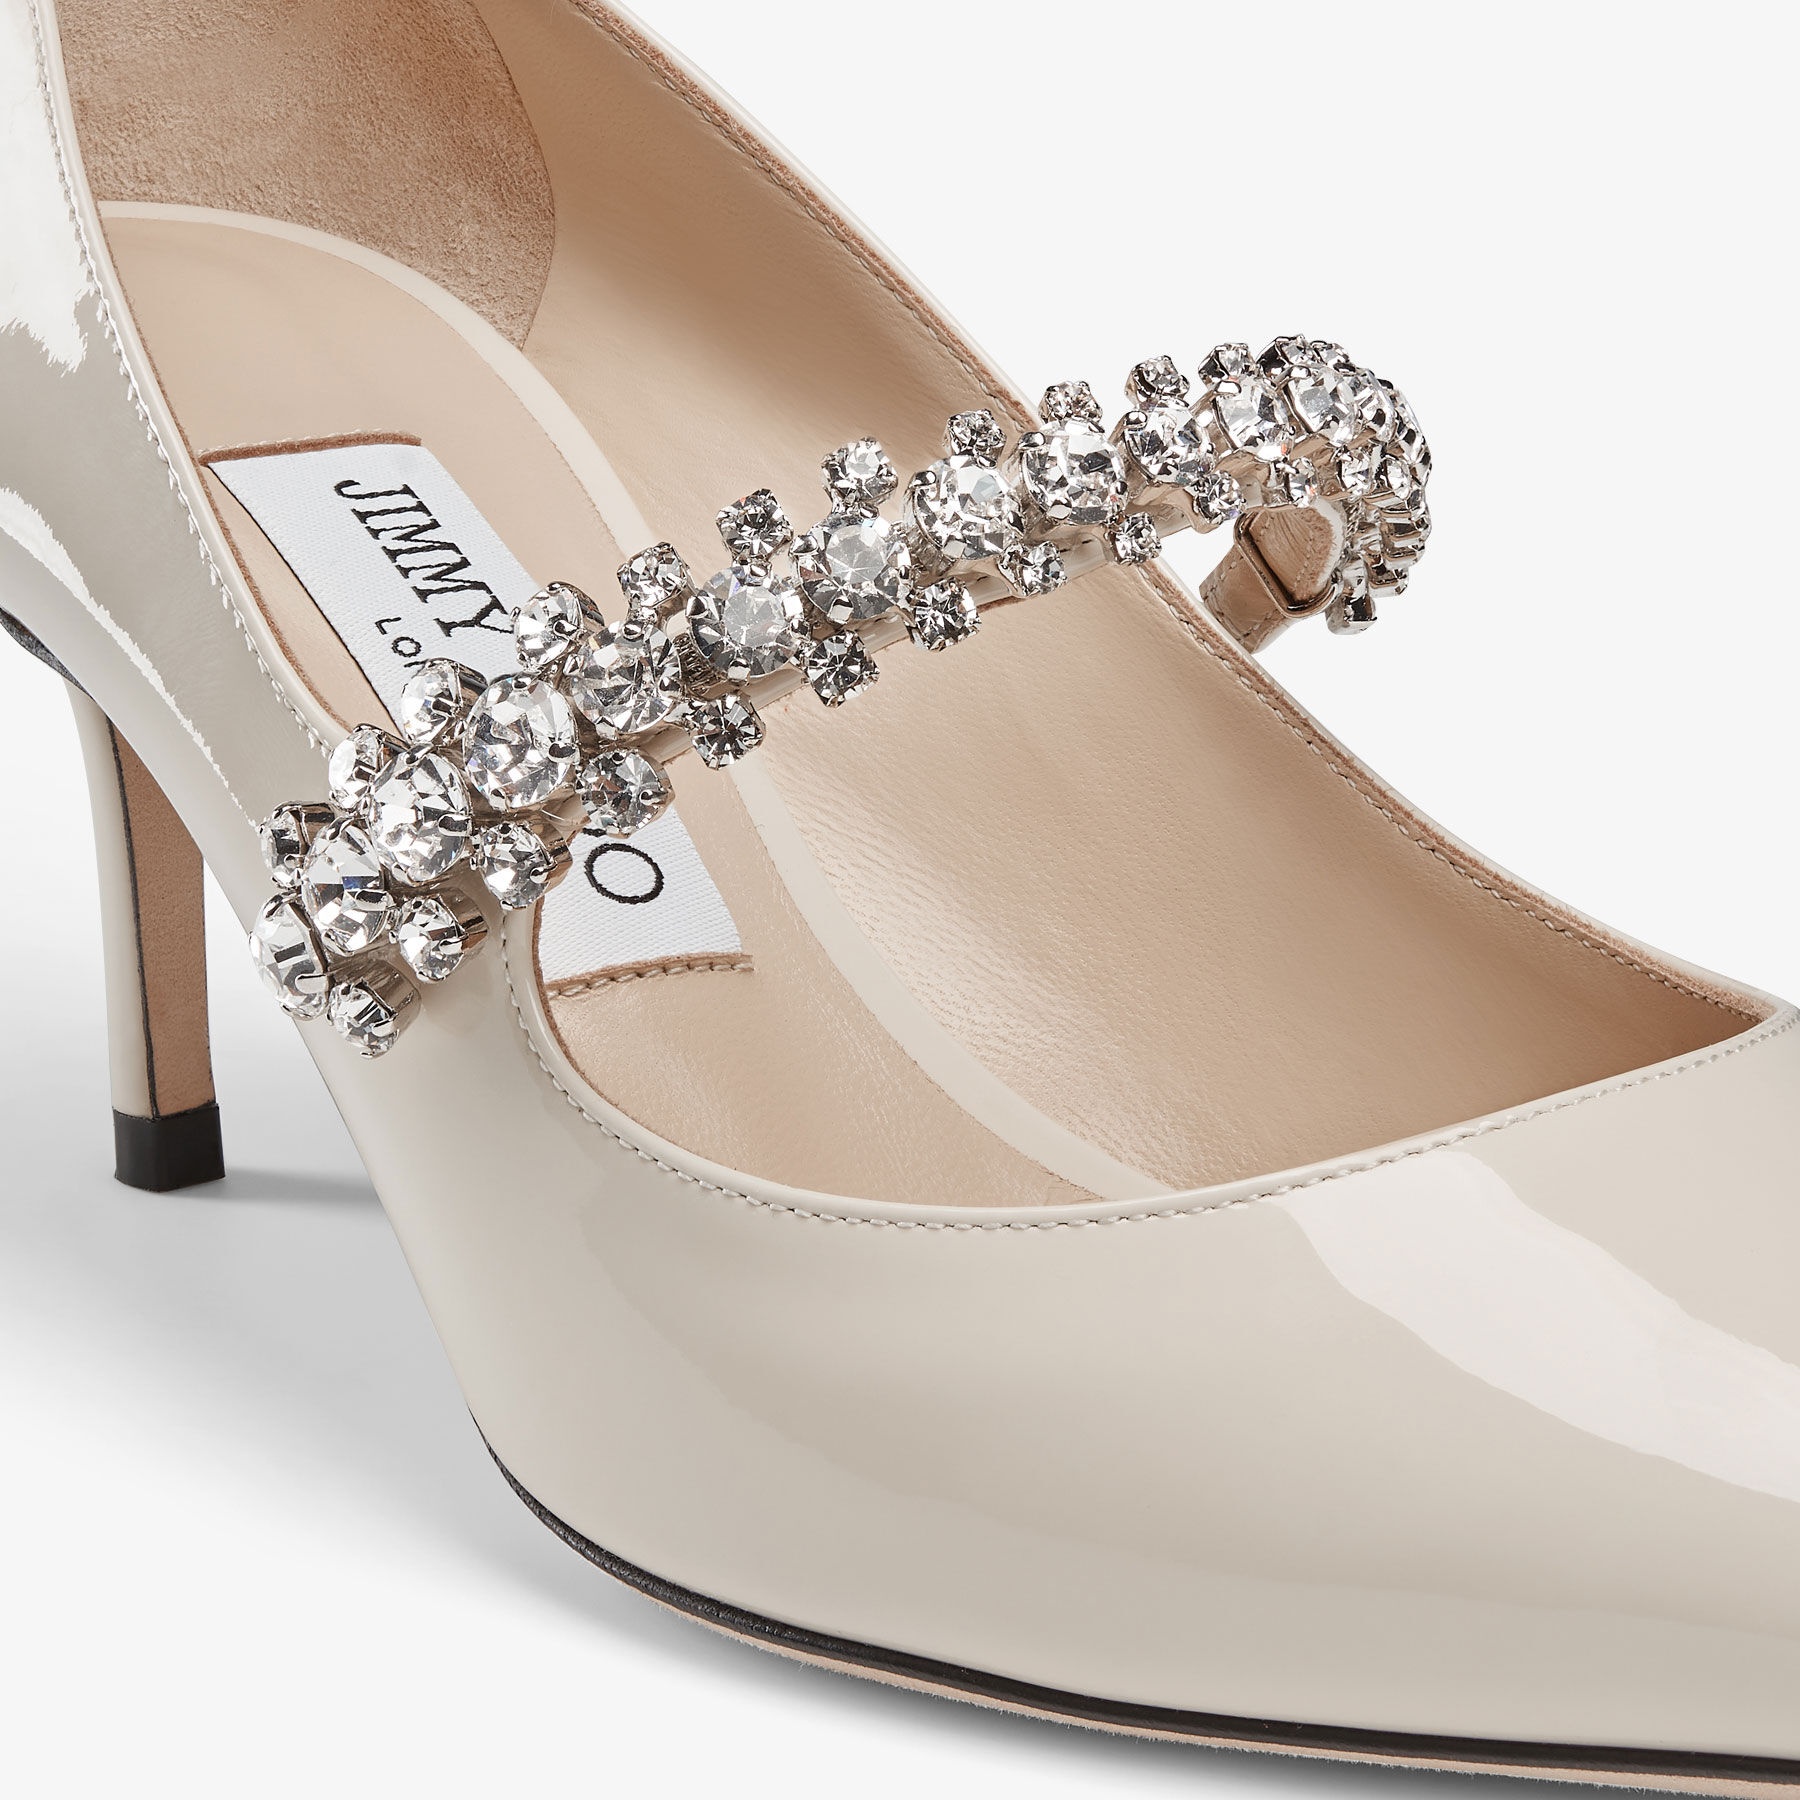 Bing Pump 65
Linen Patent Leather Pumps with Crystals - 4